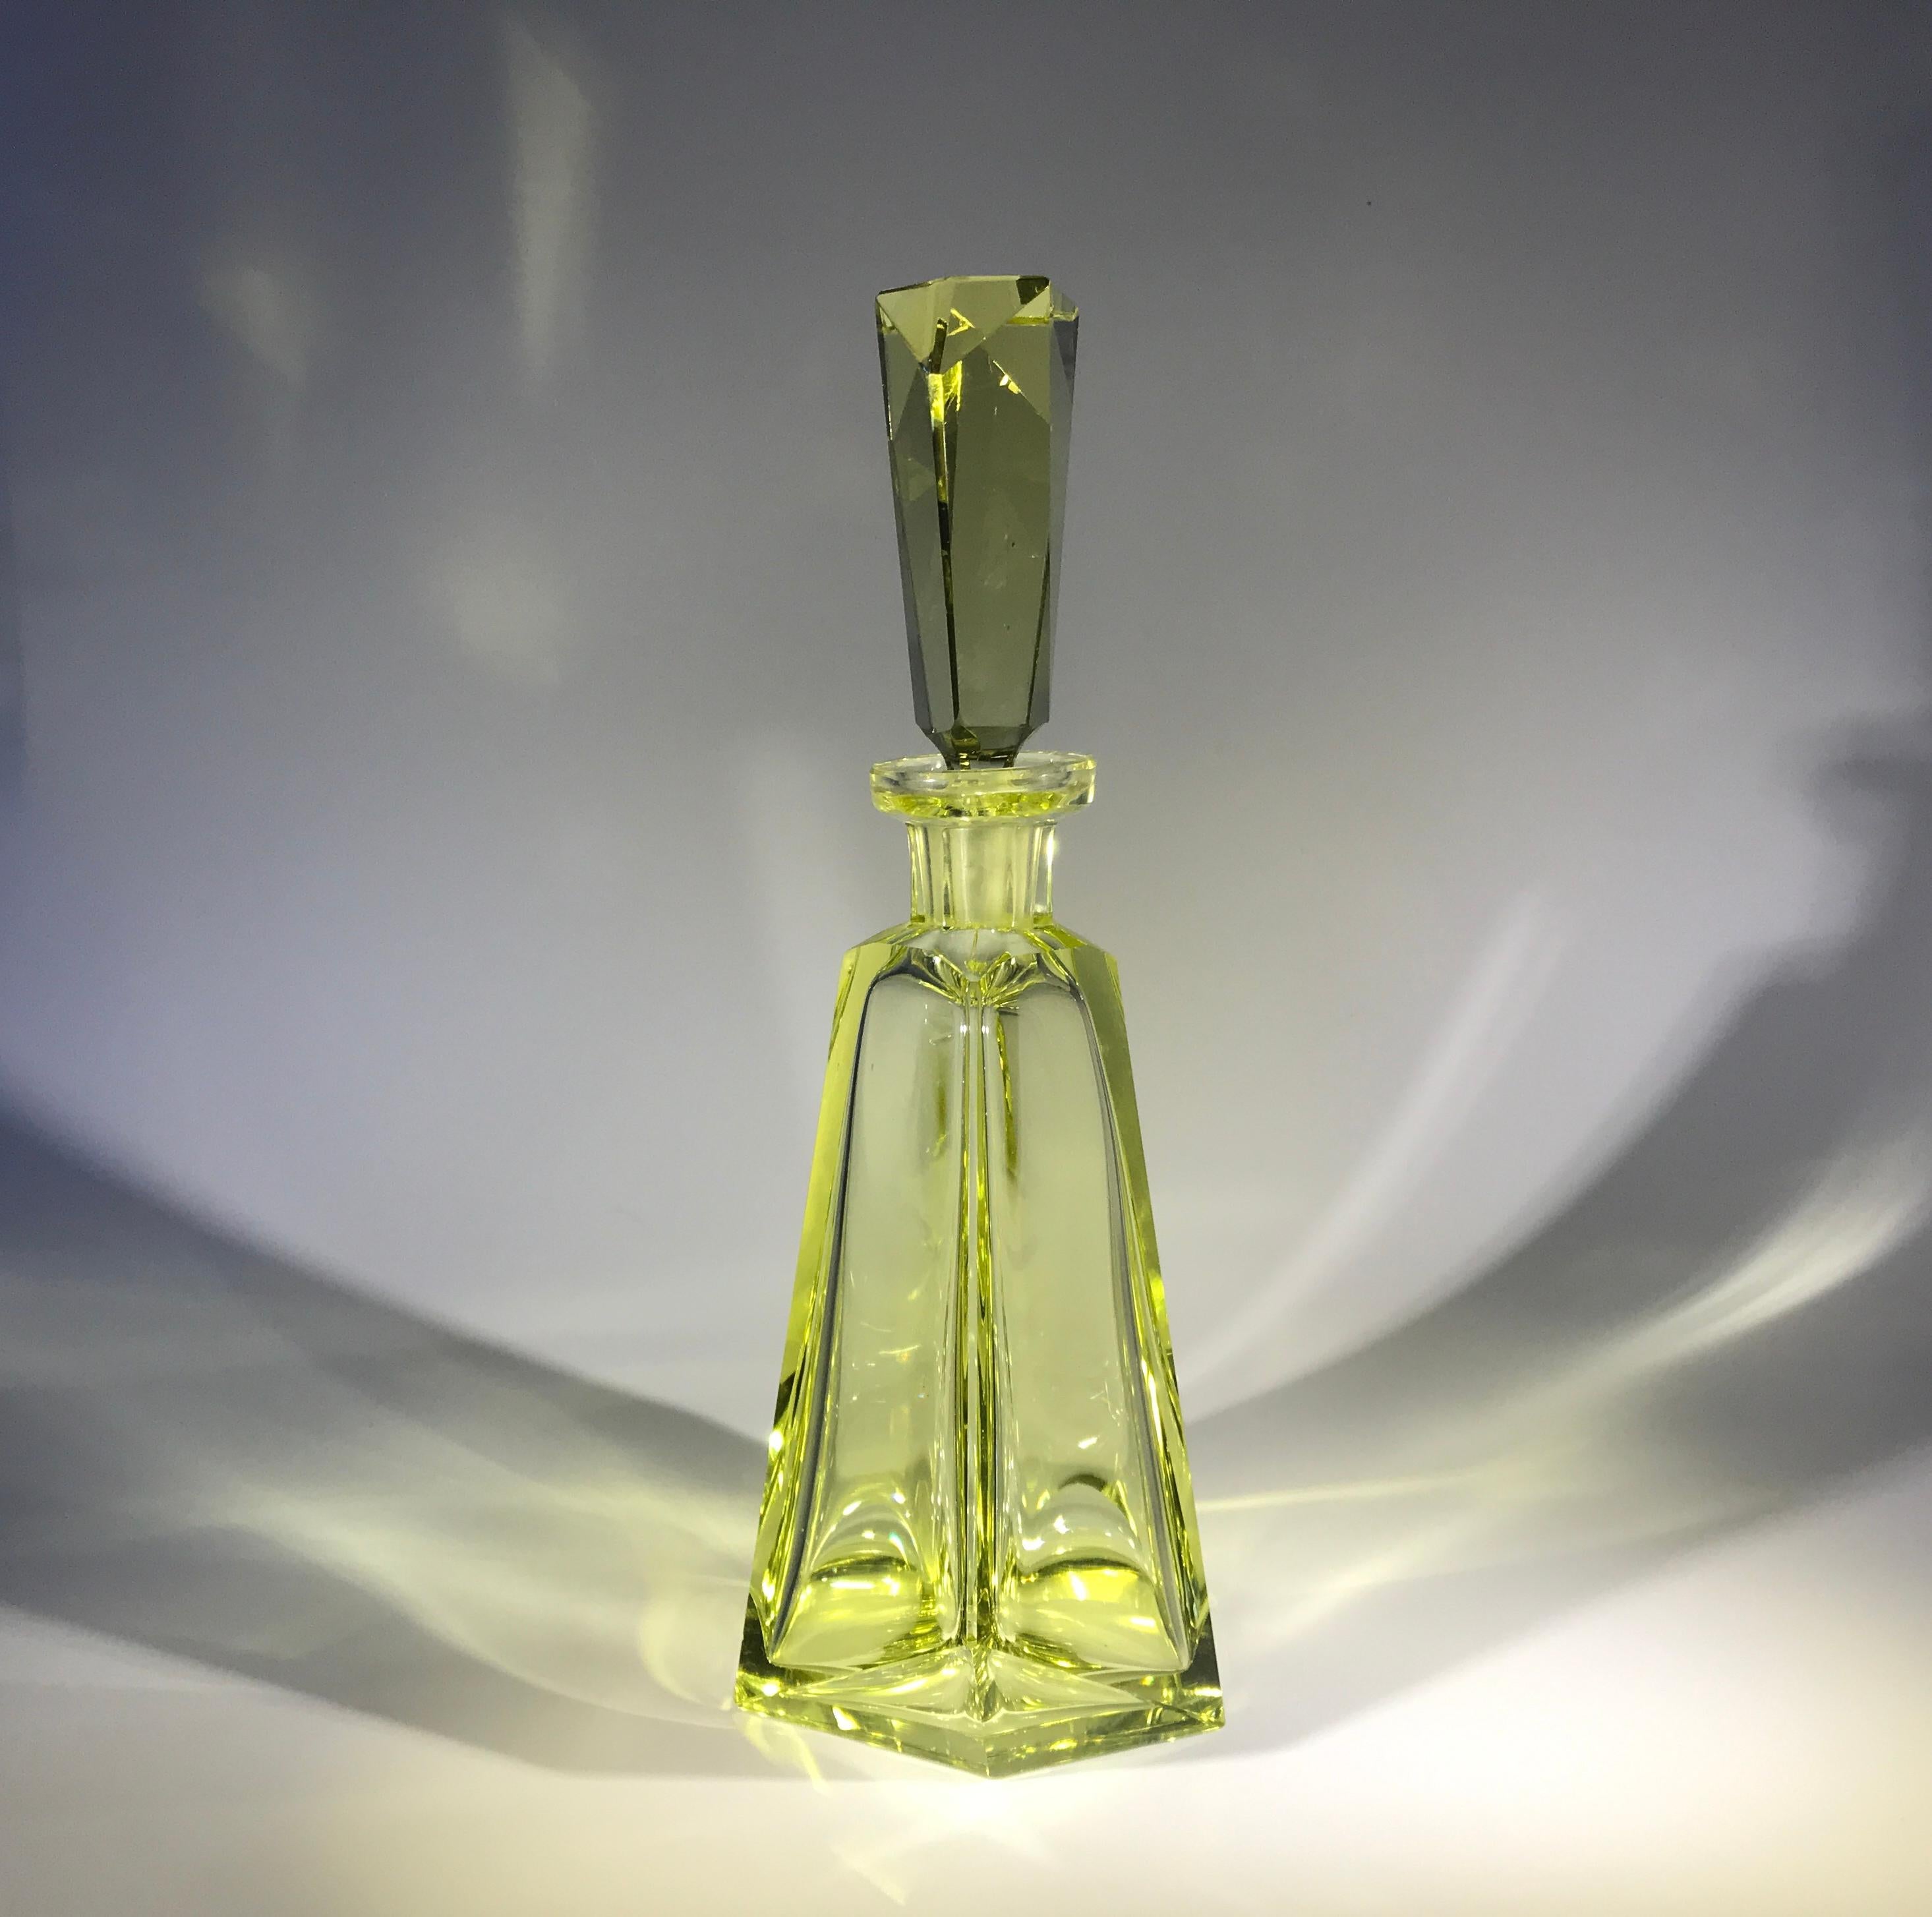 Polished Decadent Art Deco Vogue, Faceted Chartreuse Czech Crystal Decanter